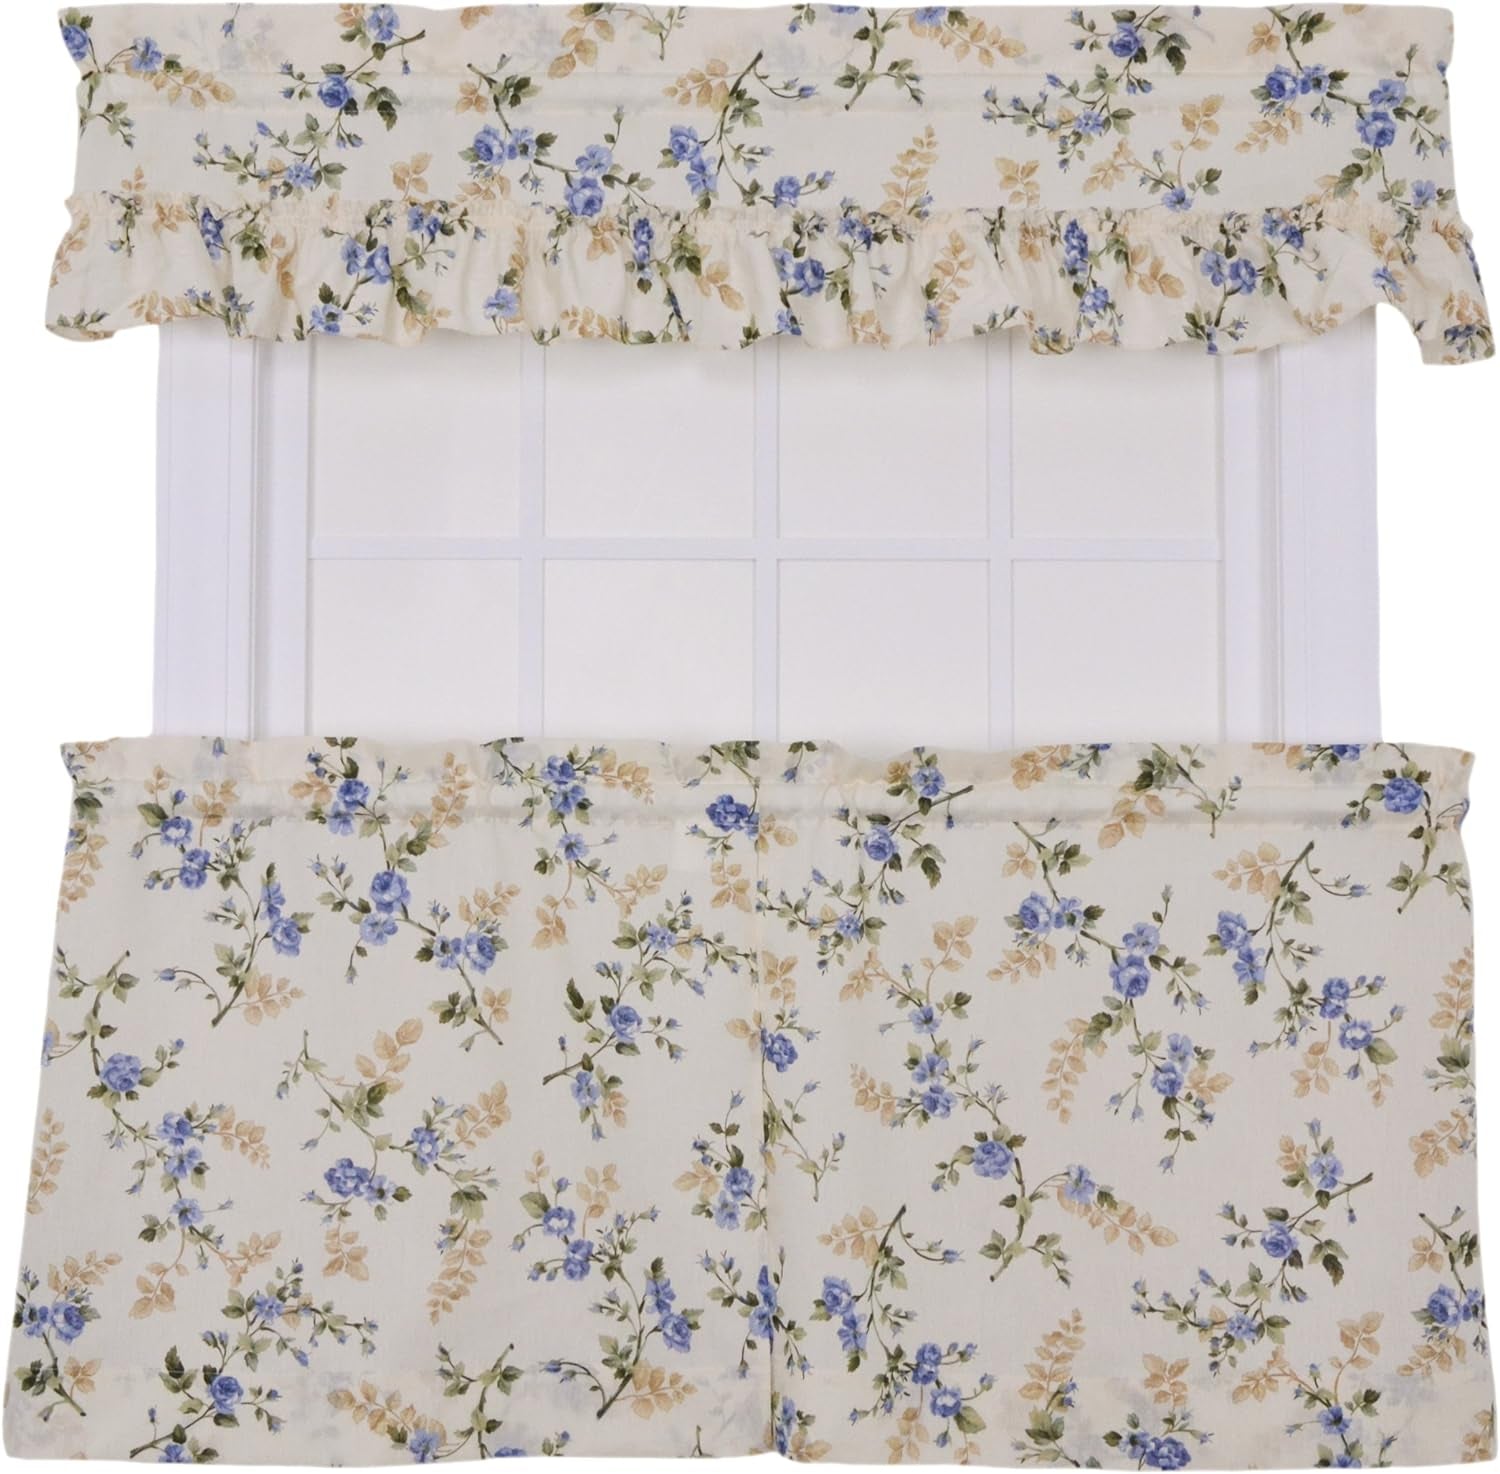 Ellis Curtain Kitchen Collection Willow Floral Ruffled Valance, Blue